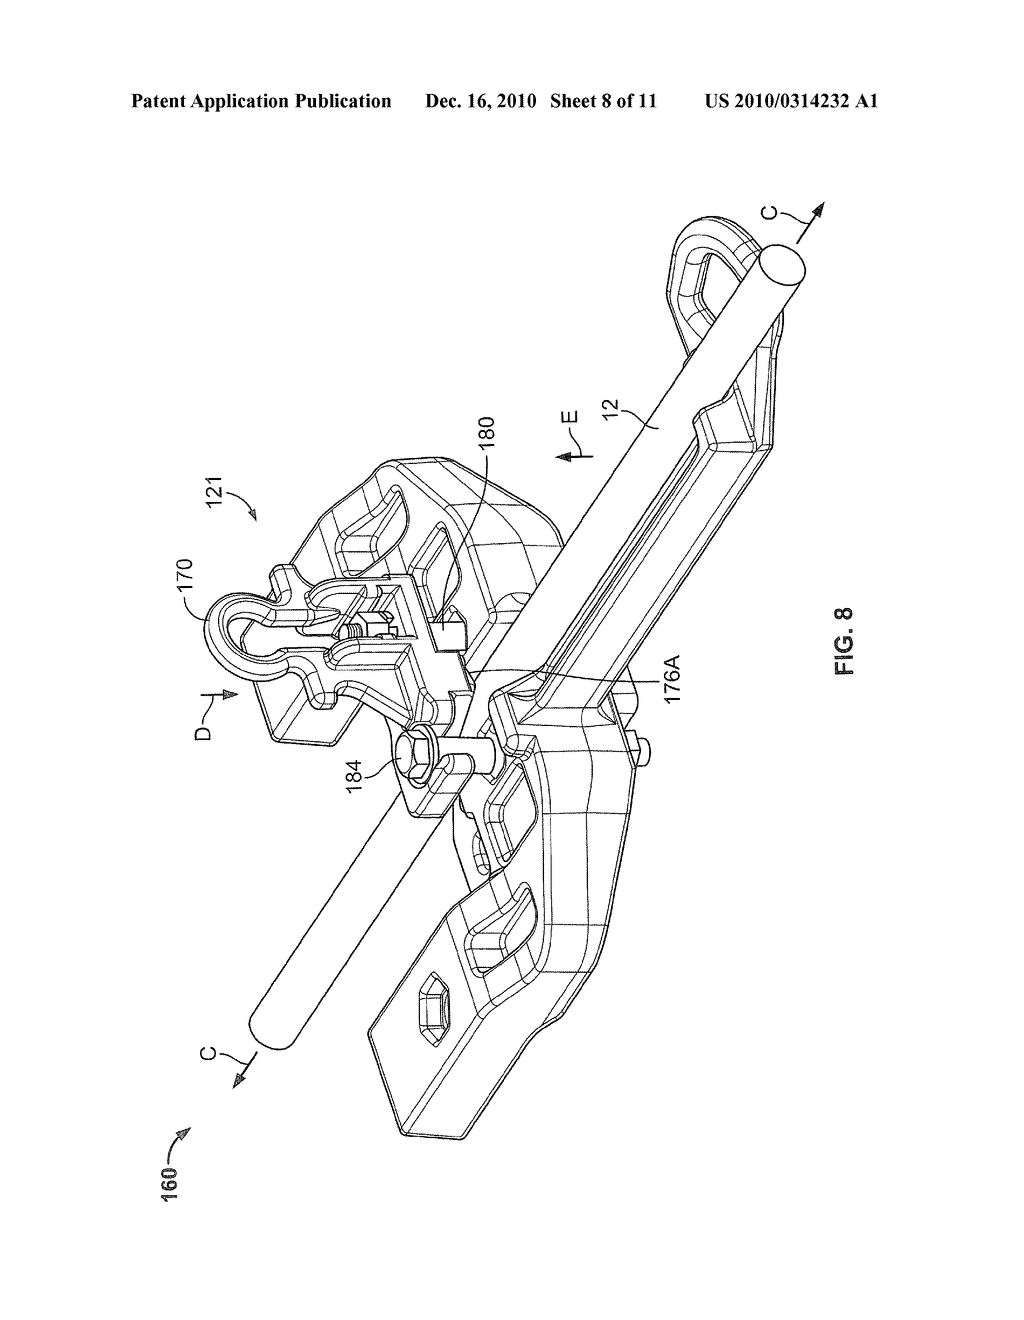 CABLE TERMINATION SYSTEMS AND ISOLATING APPARATUS FOR ELECTRICAL POWER TRANSMISSION CONDUCTORS AND METHODS USING THE SAME - diagram, schematic, and image 09